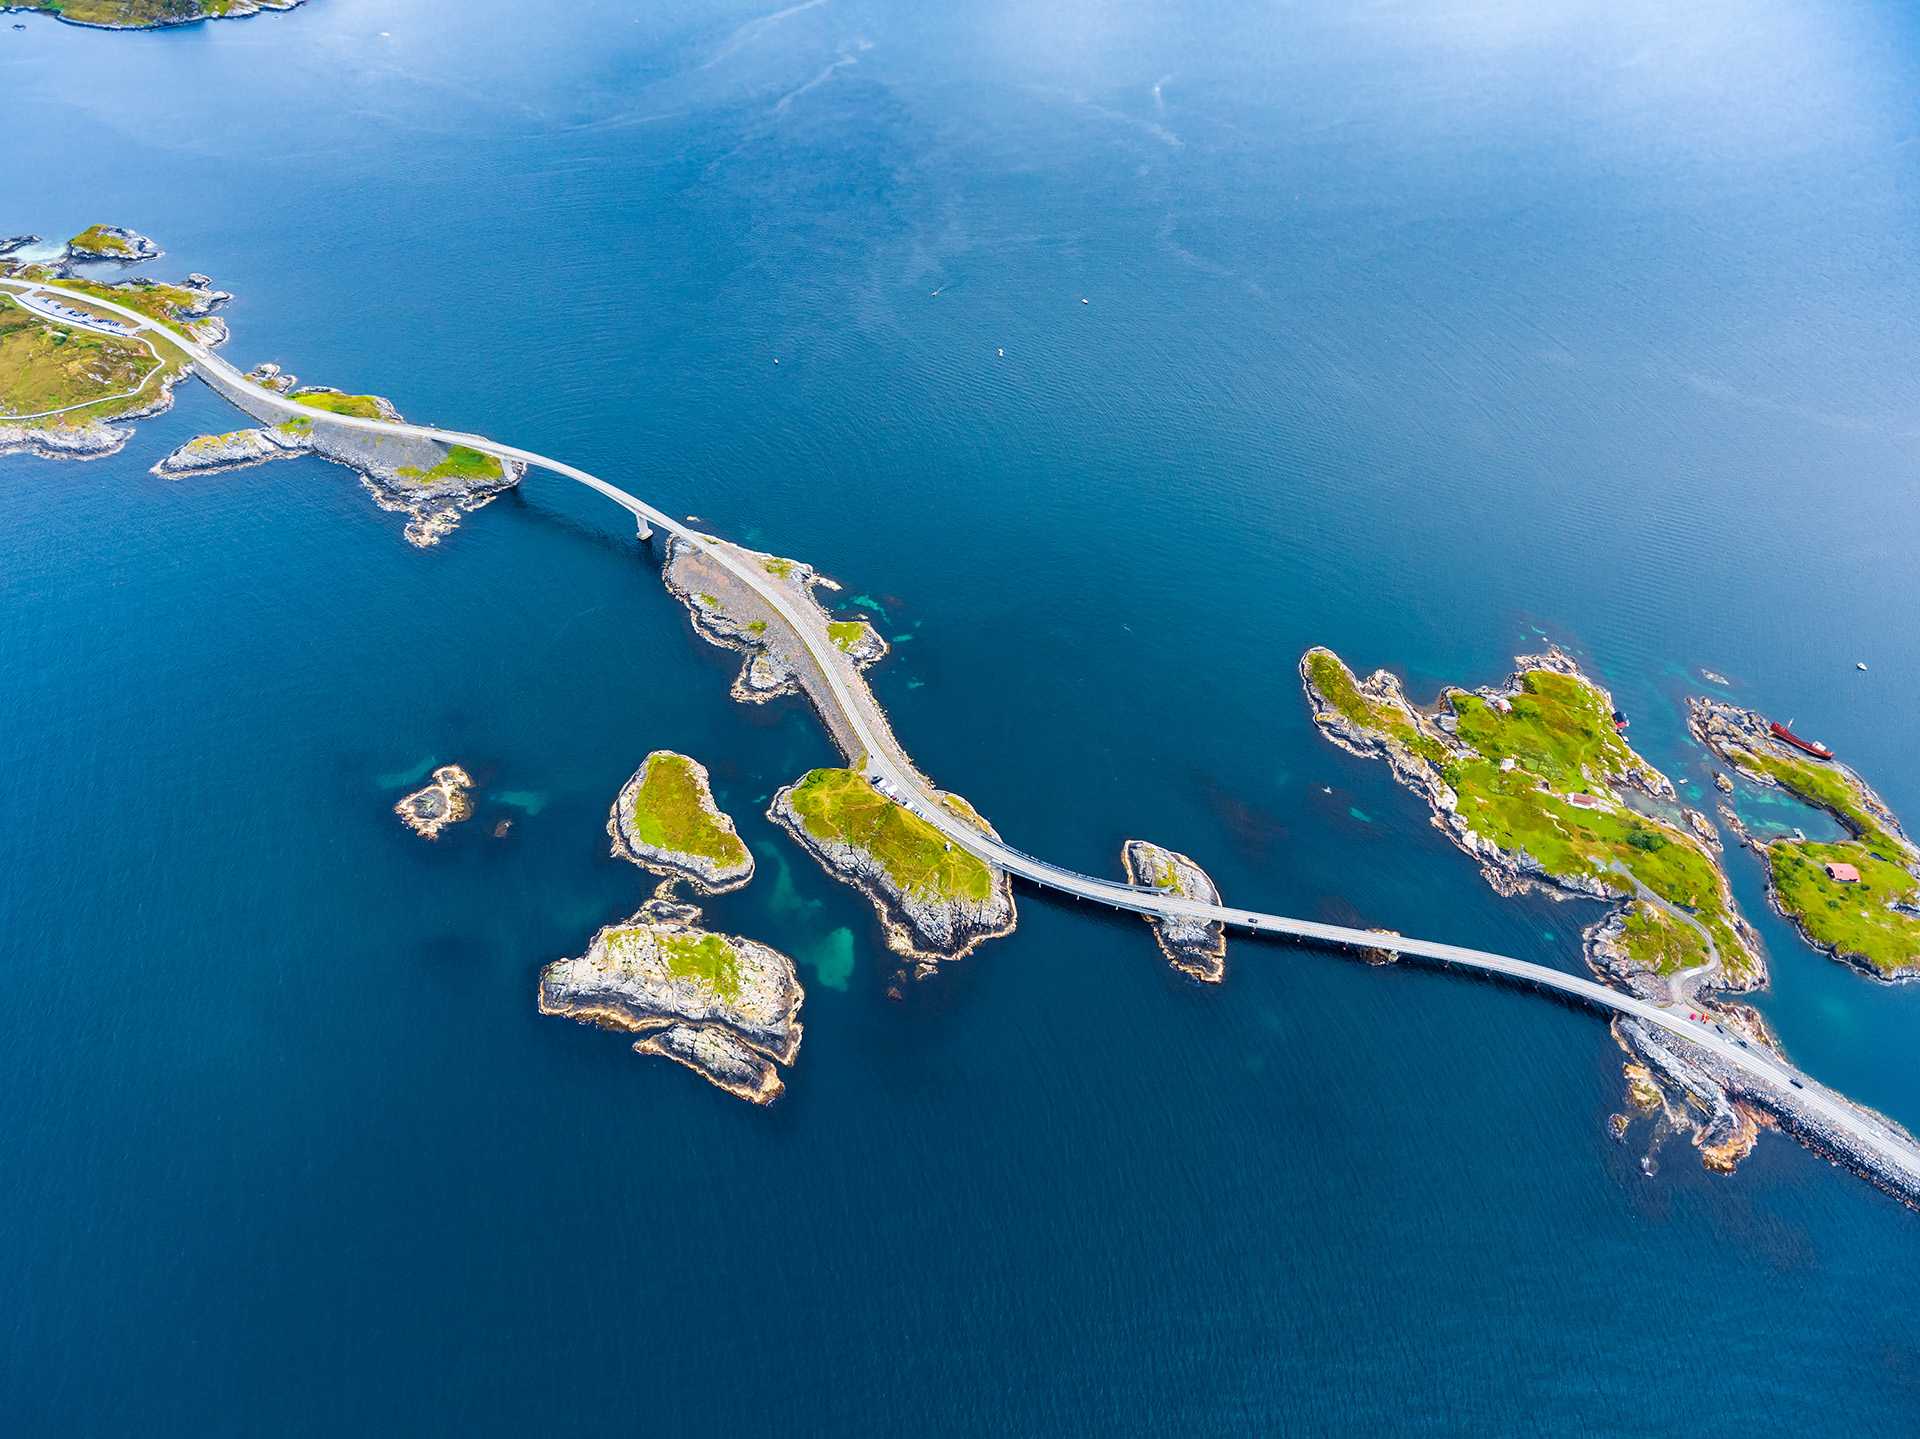 Bridge connects small islands